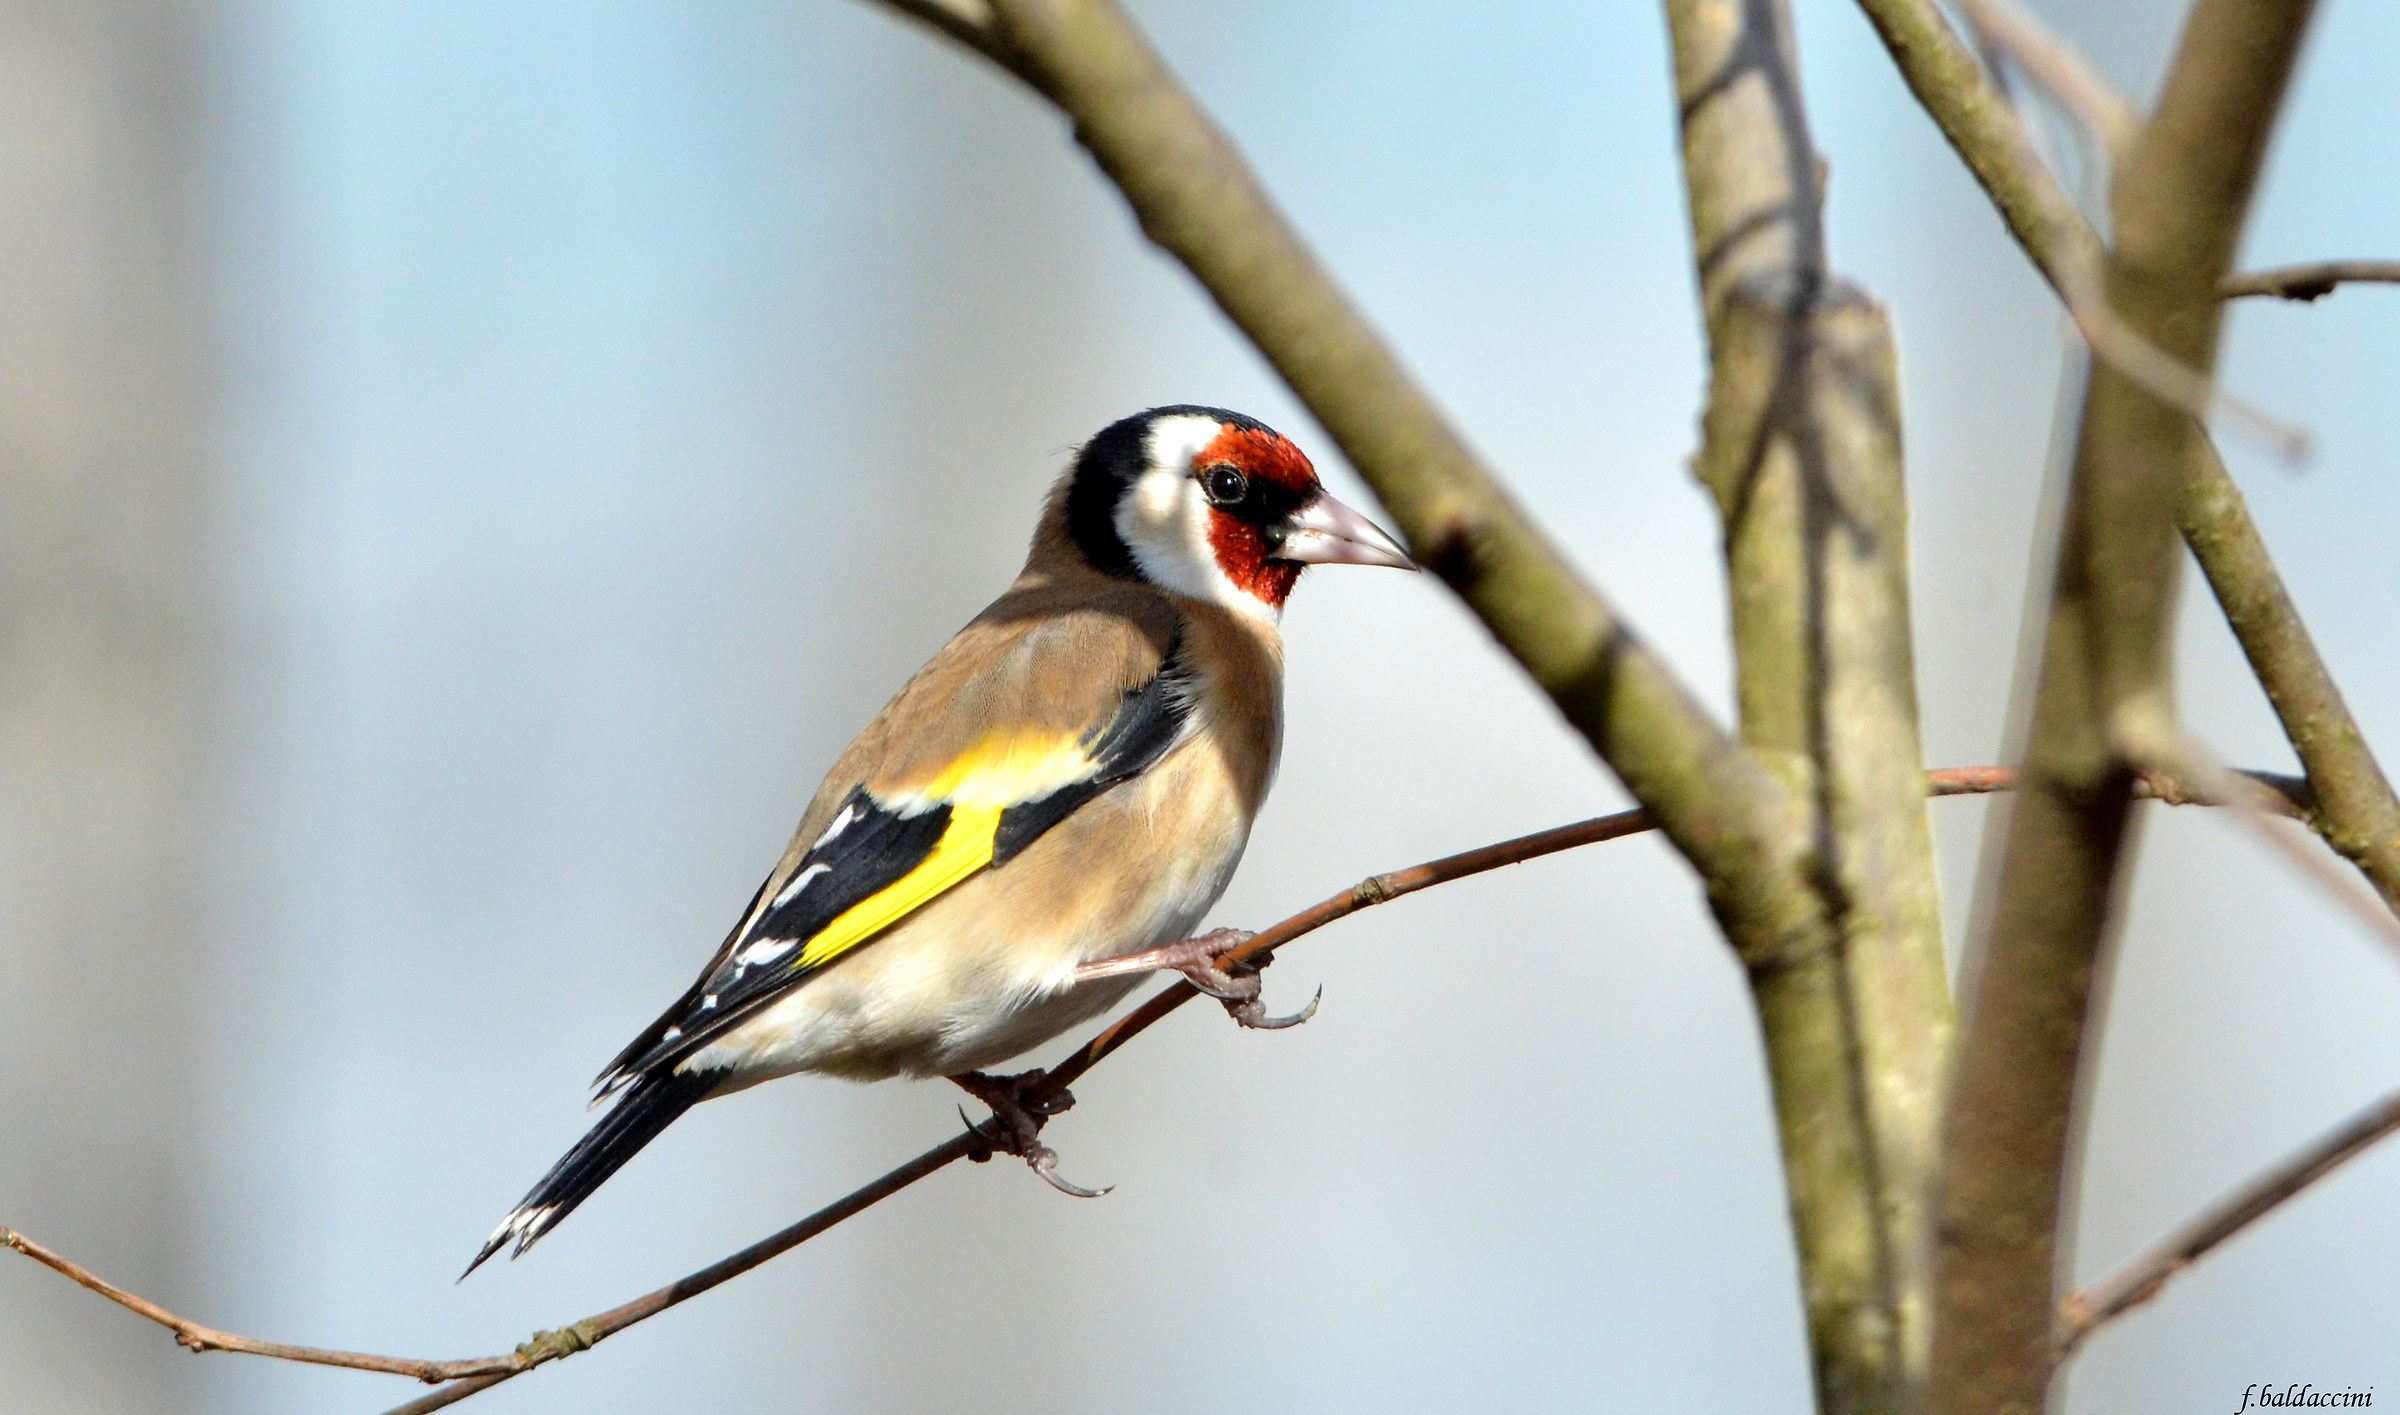 the Goldfinch...